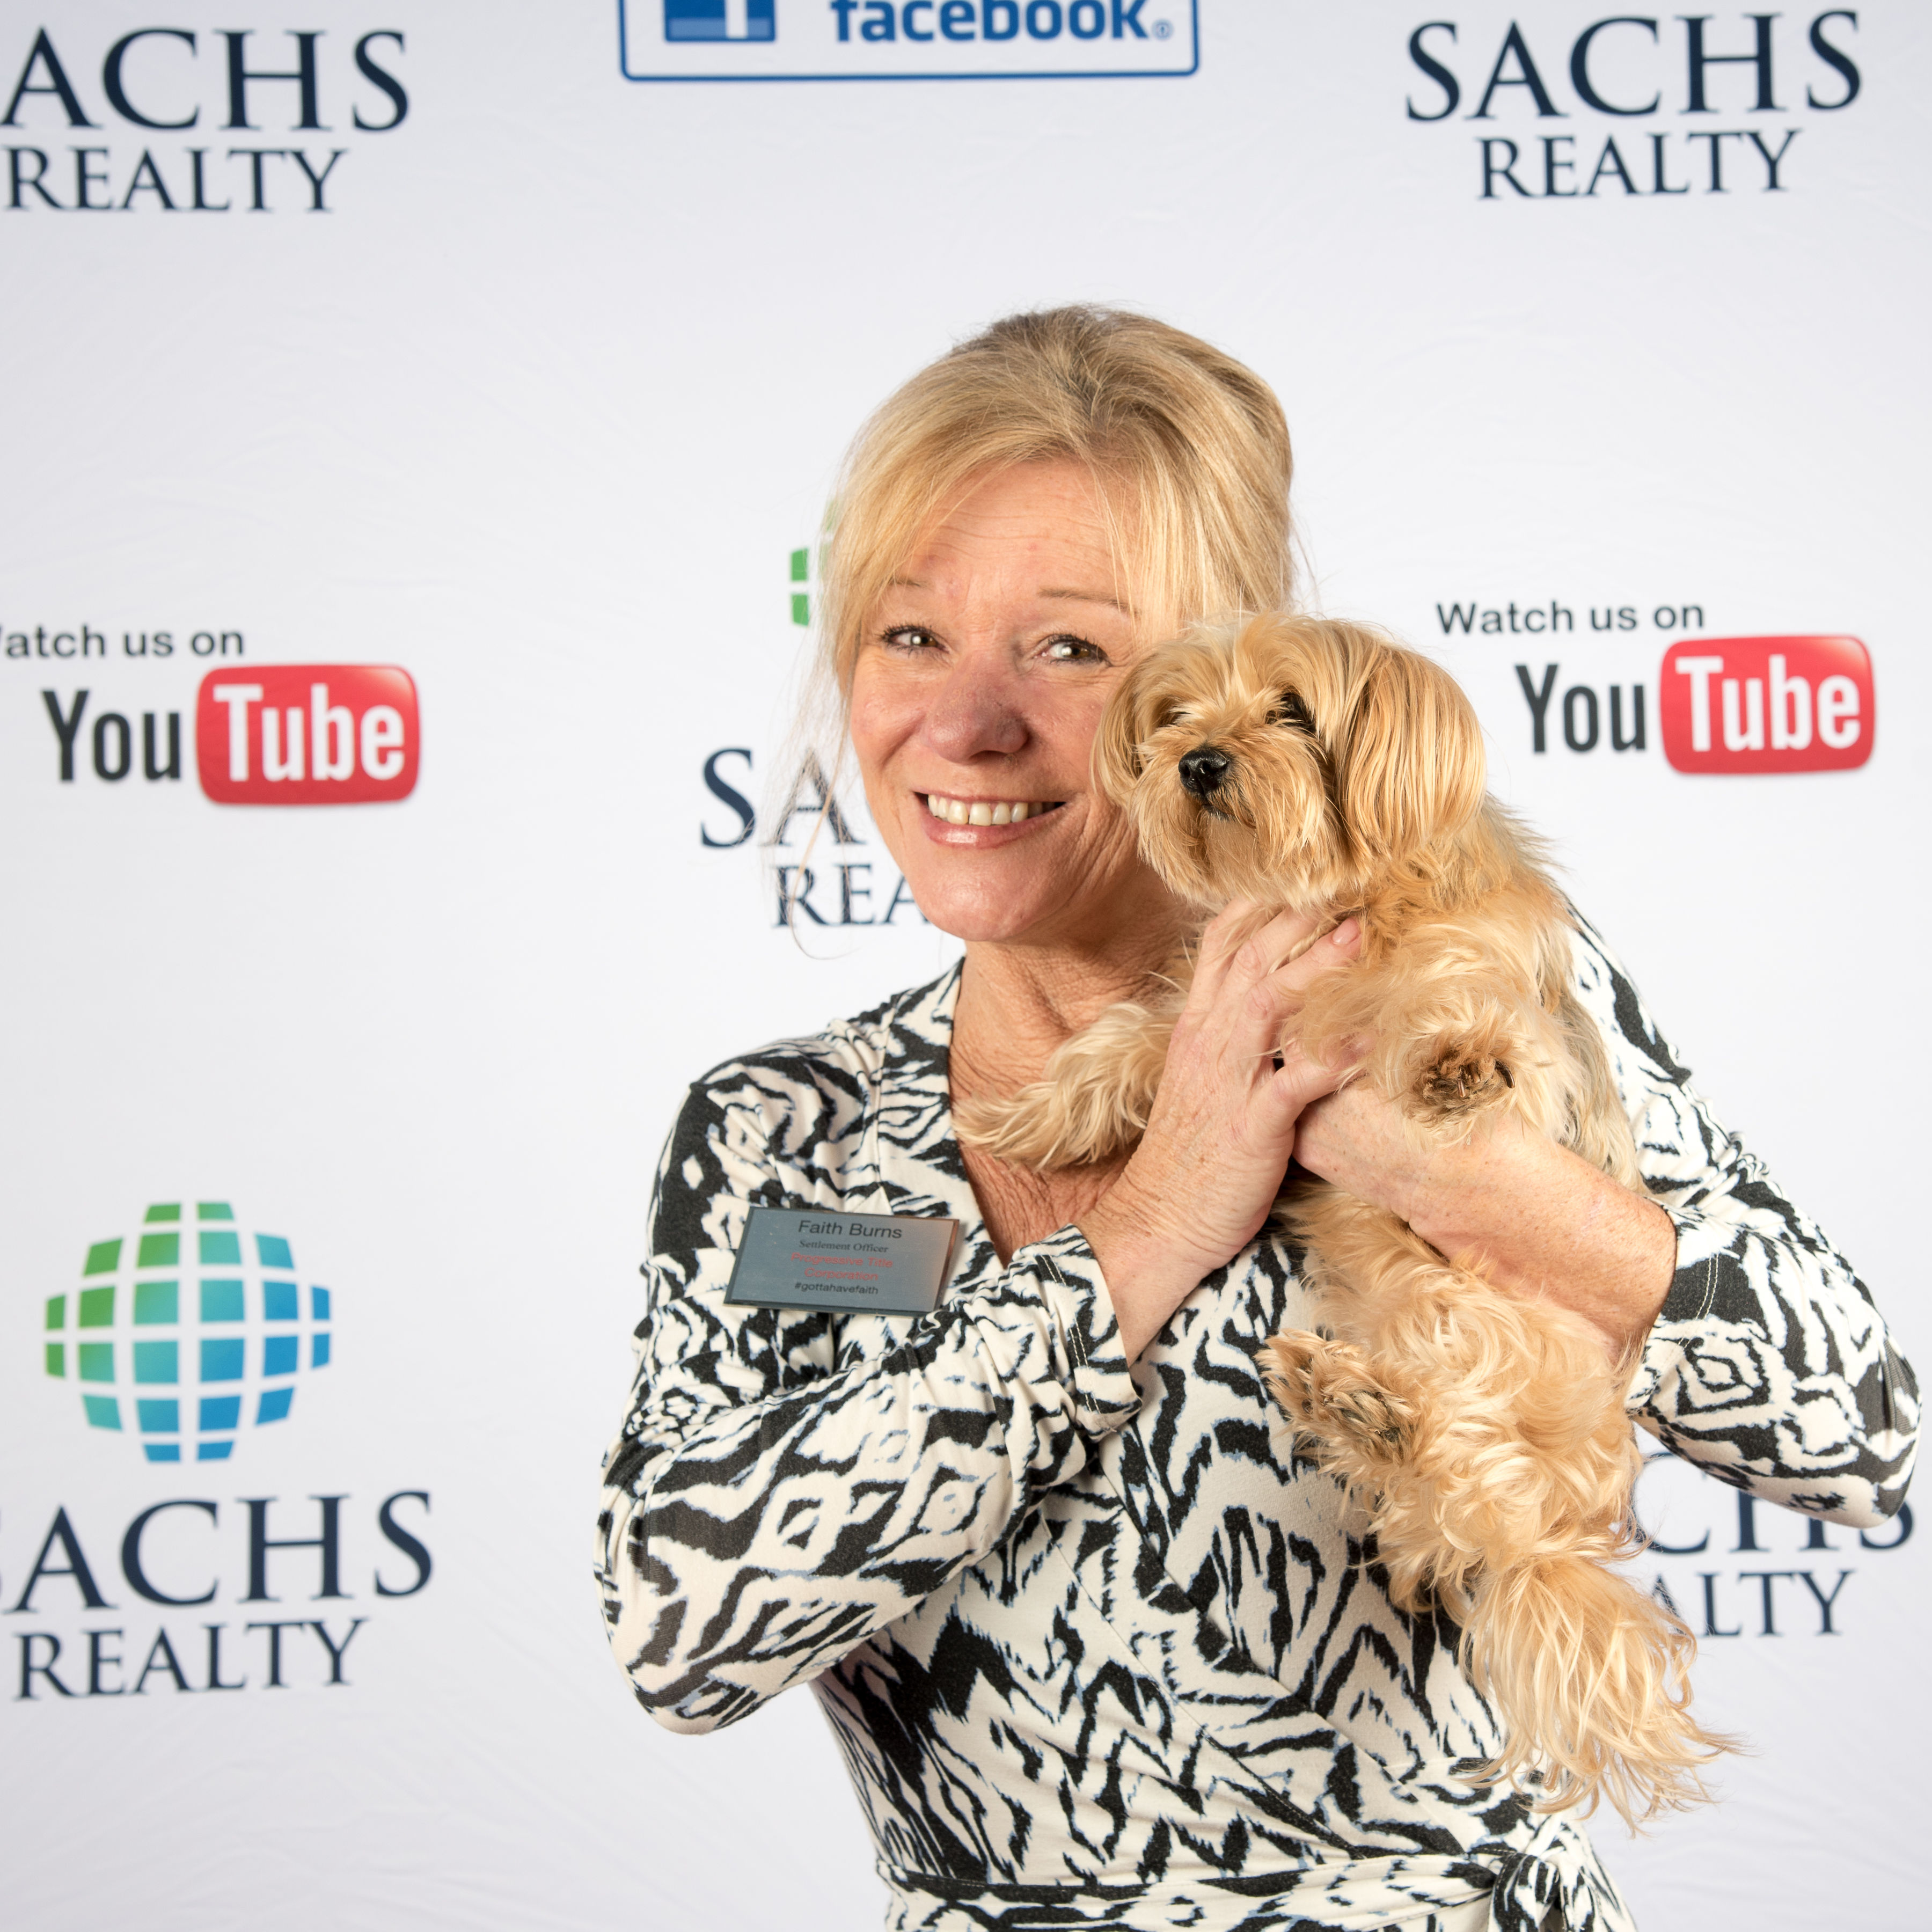 Faith at the Sachs Realty networking event